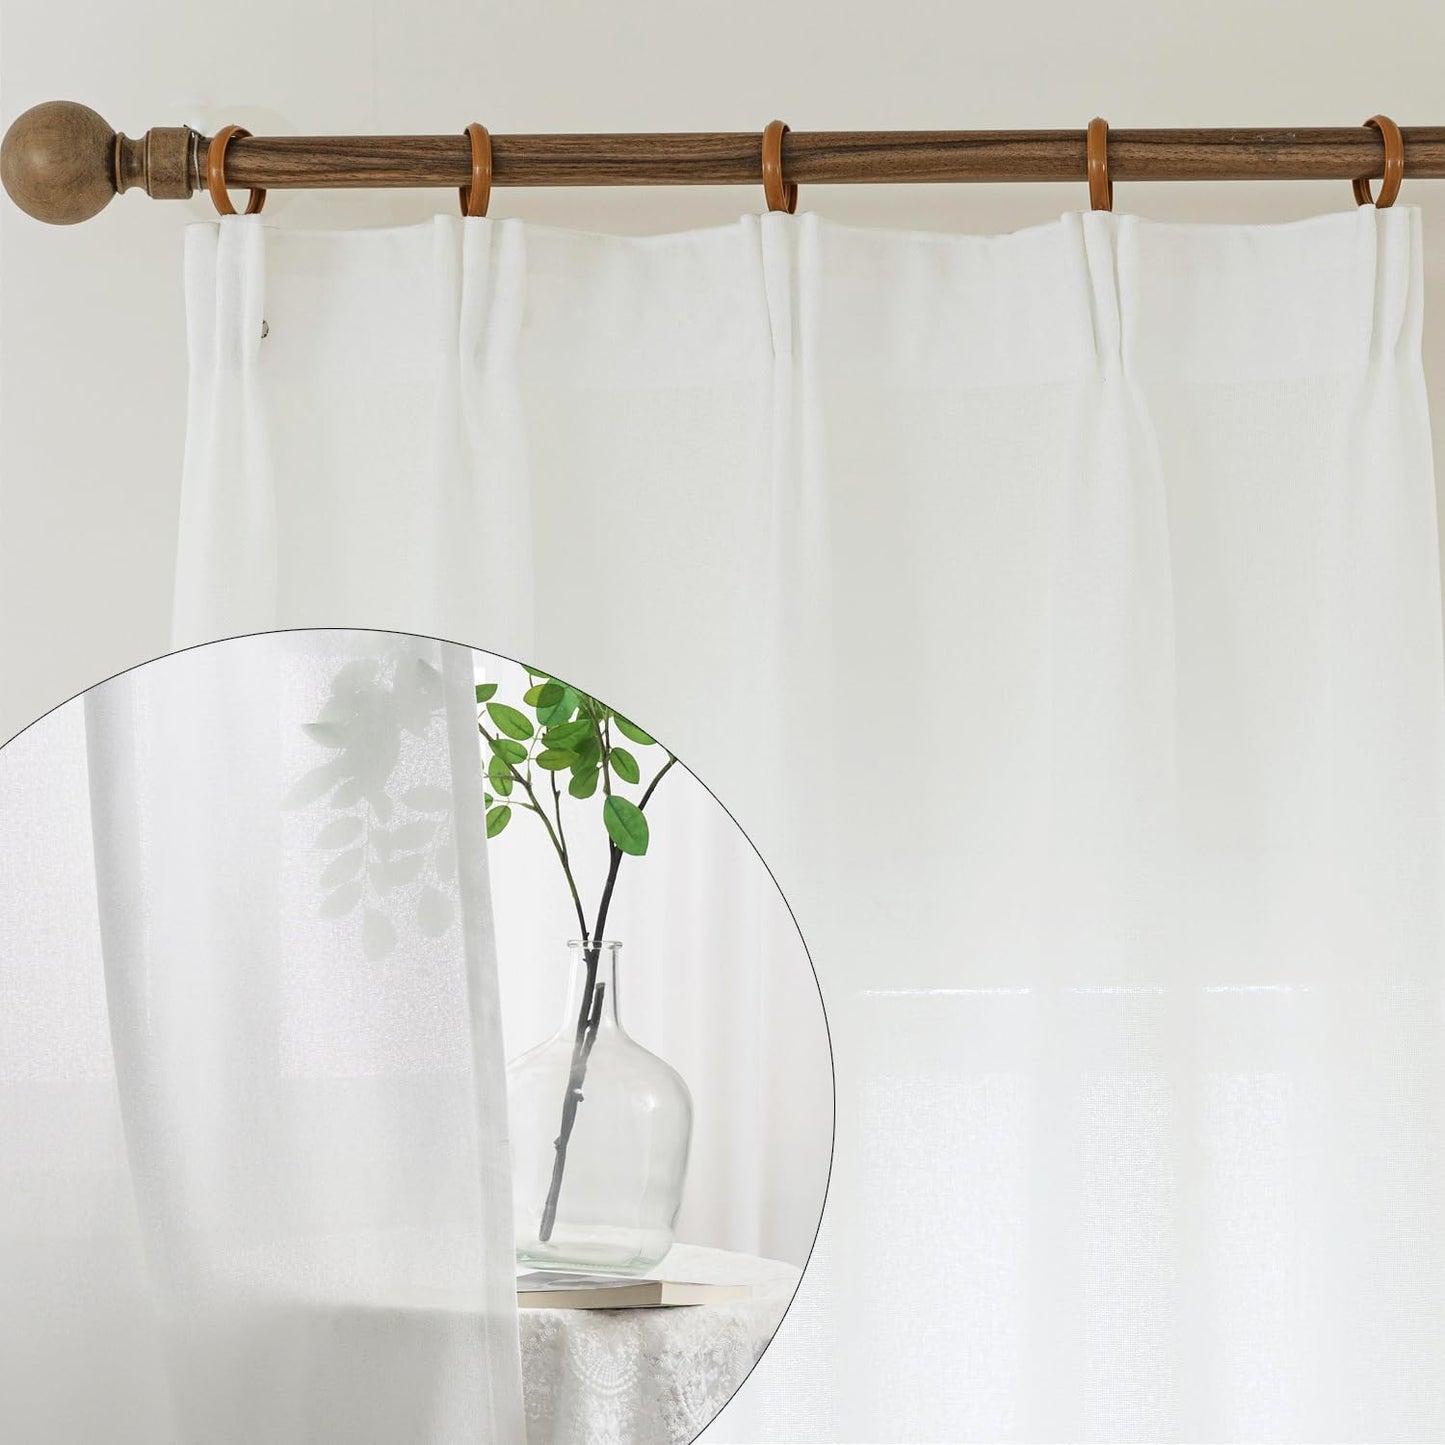 Ftinala Drapes 108 Inches Long 2 Panels Sheer Linen Curtains Pinch Pleat Curtain Hooks Floor to Ceiling Curtains 108 Inch Tan Extra Long Curtains Pleated Light Filtering Curtains Cream Beige  Ftinala Warm White-Pleat Tape 50"W X 102"L 